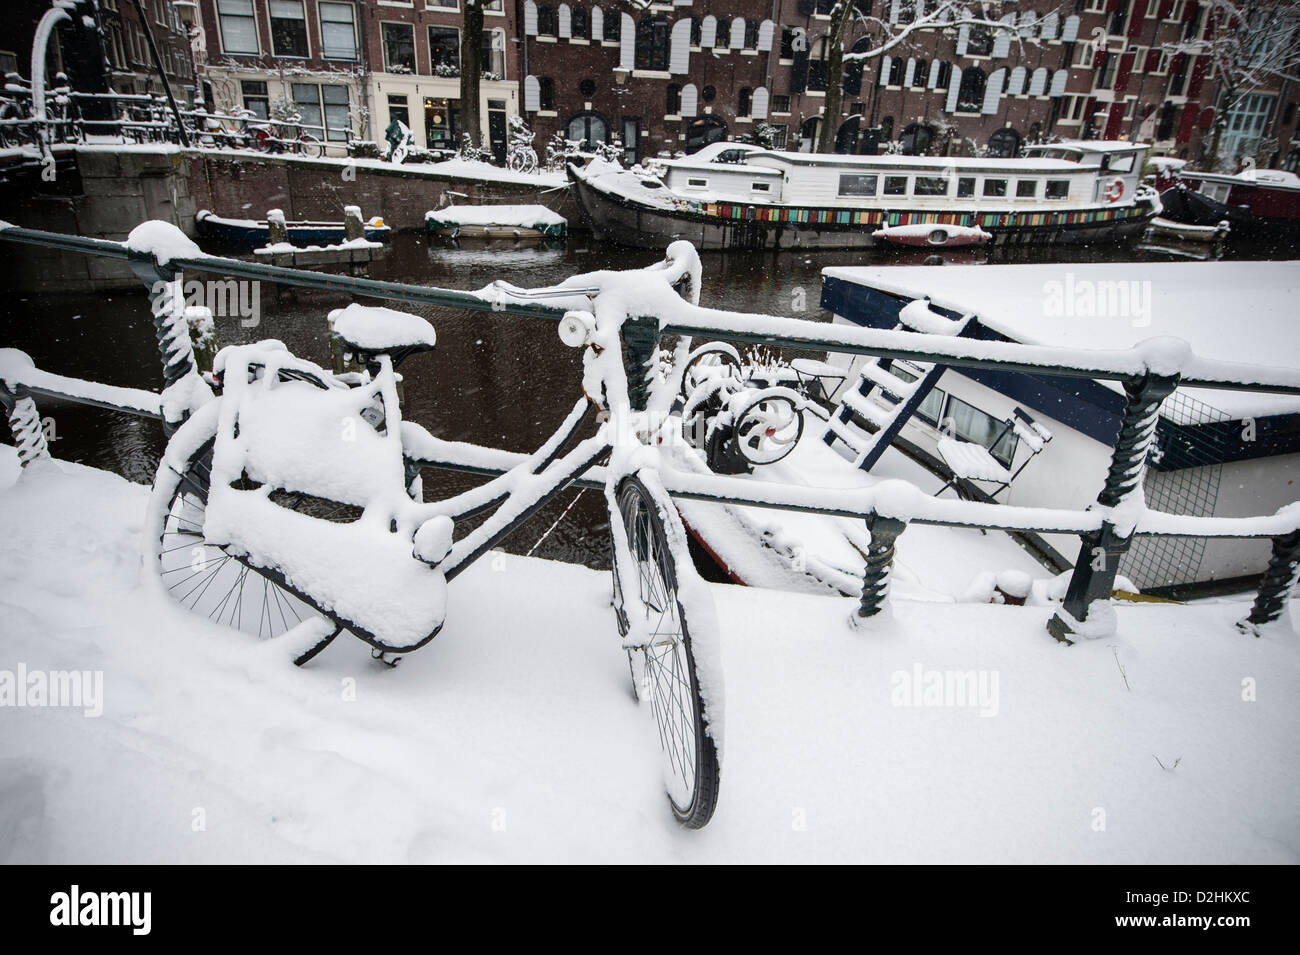 Jordaan, Amsterdam Winter High Resolution Stock Photography and Images -  Alamy